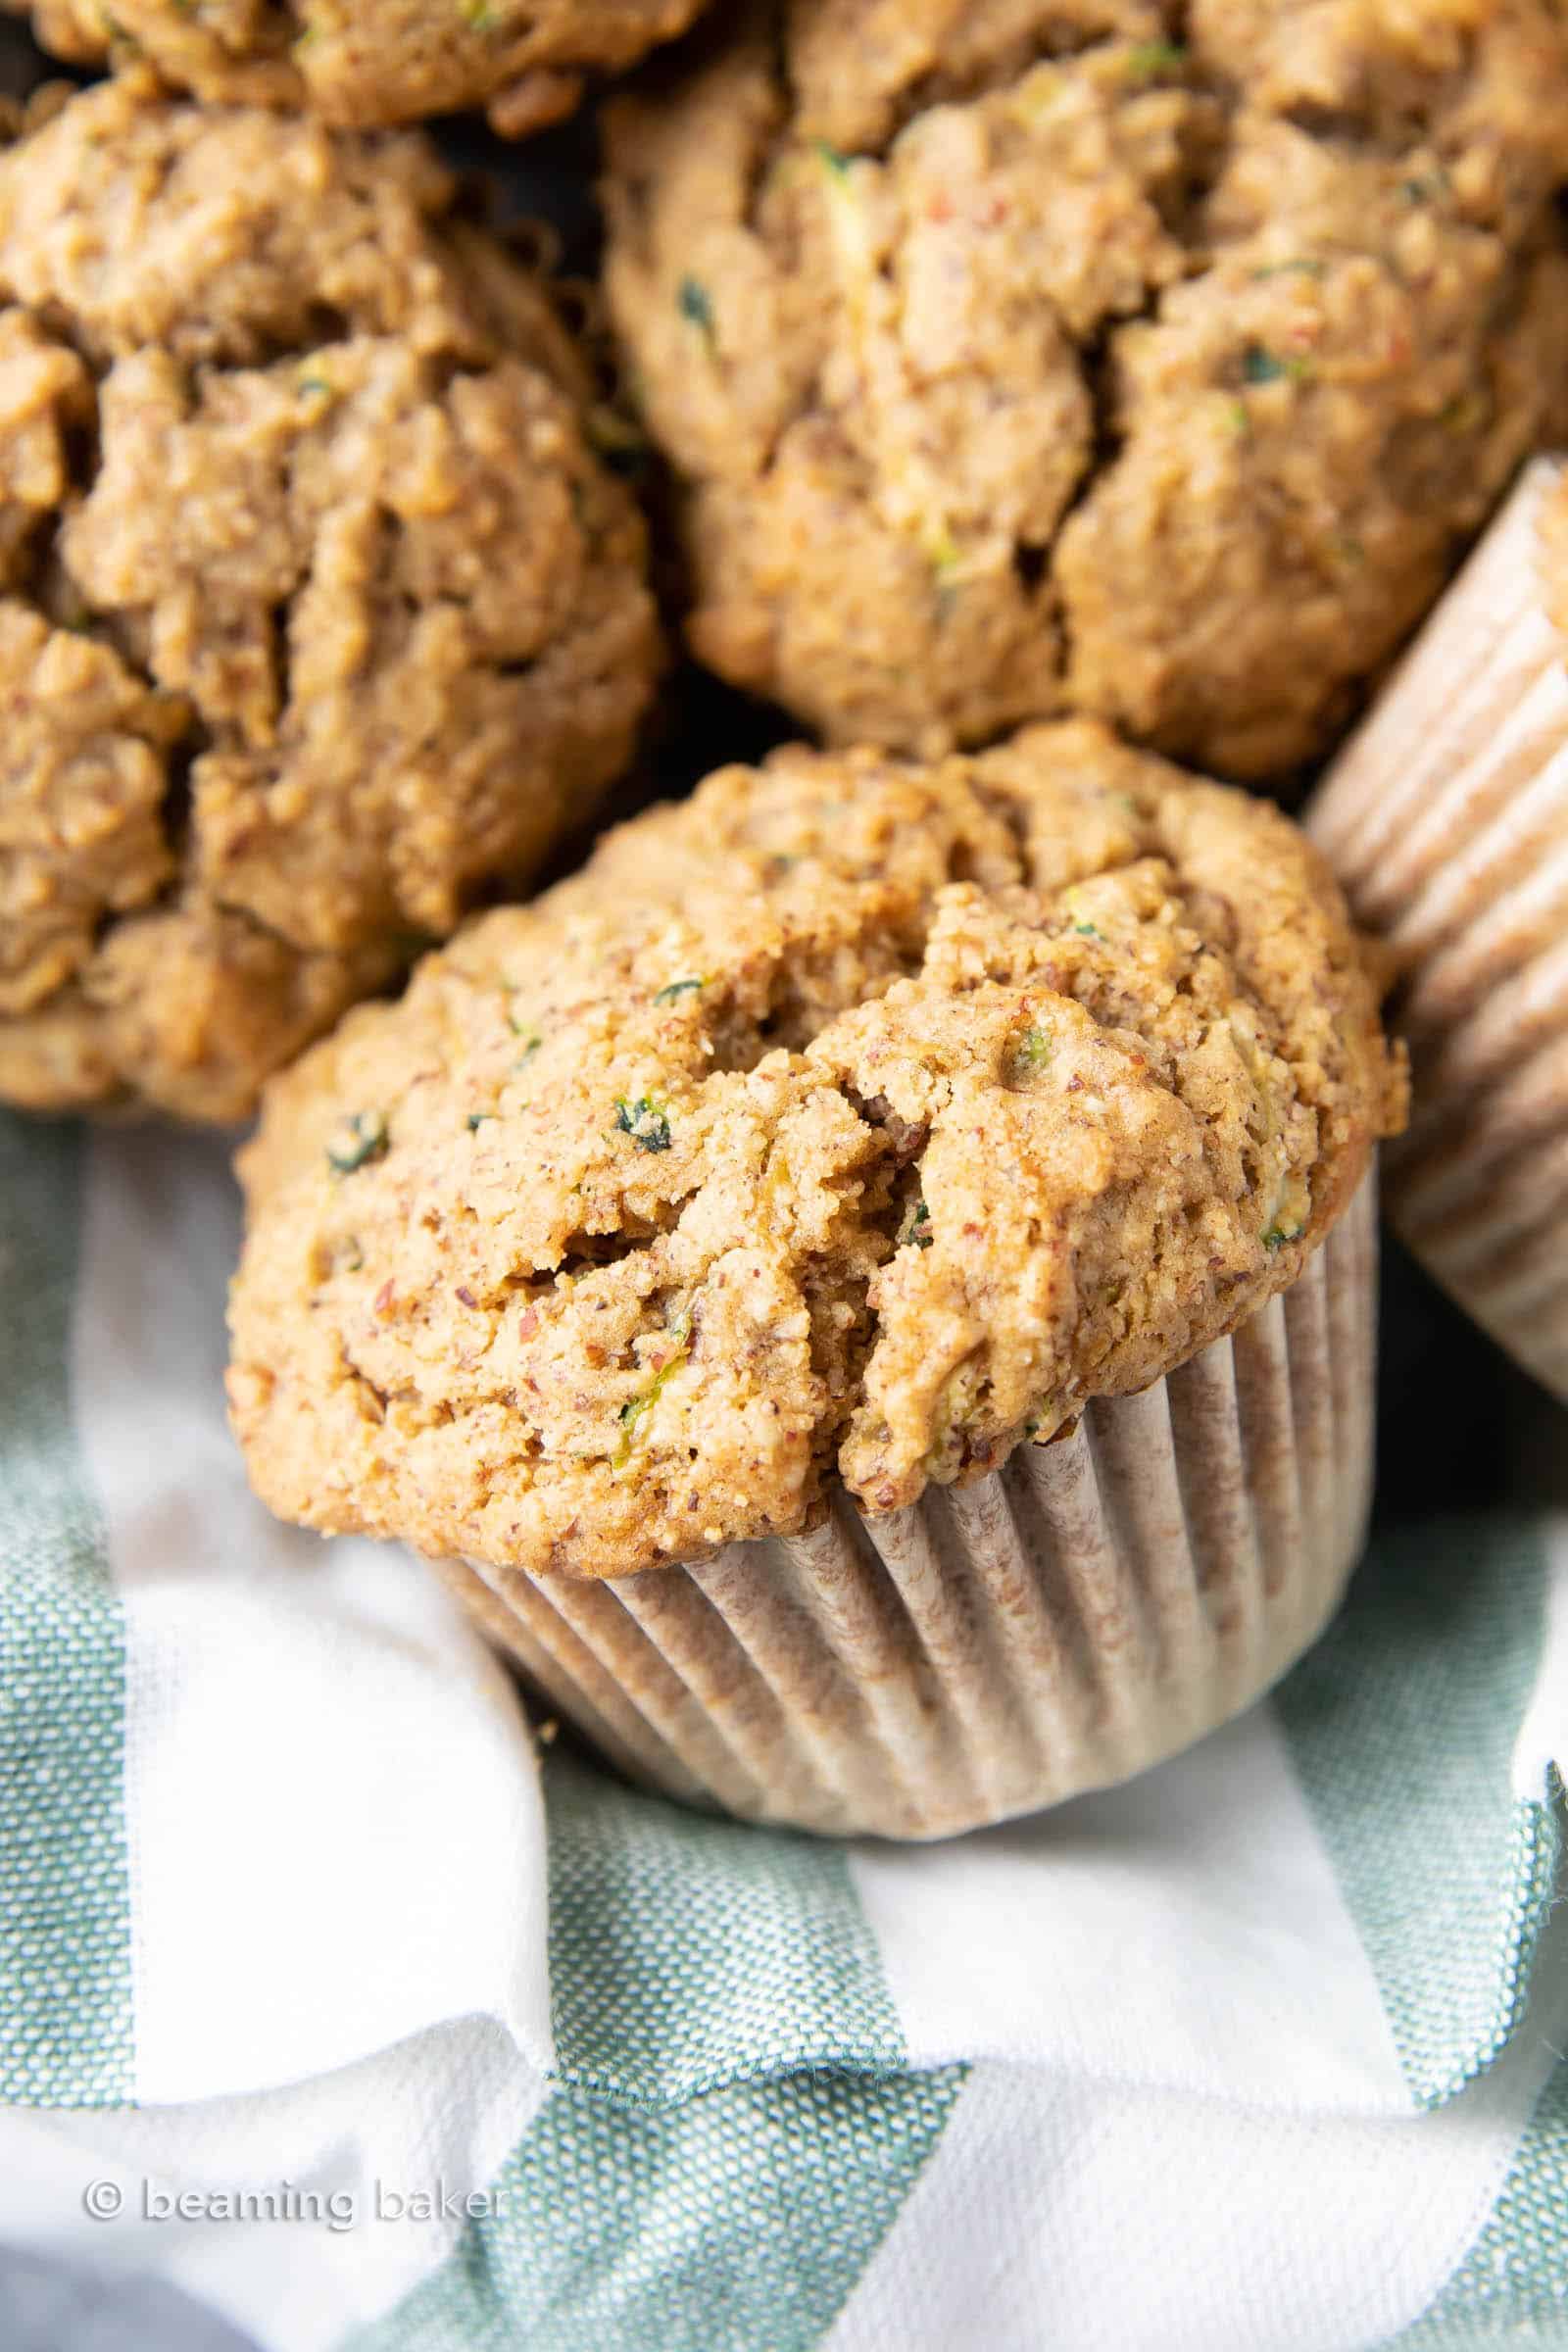 The Best Healthy Zucchini Muffins: Soft ‘n moist zucchini muffins that are buttery, perfectly sweet and made with healthy ingredients. The best zucchini muffin recipe! #Healthy #Zucchini #Muffins #Recipe | Recipe at BeamingBaker.com